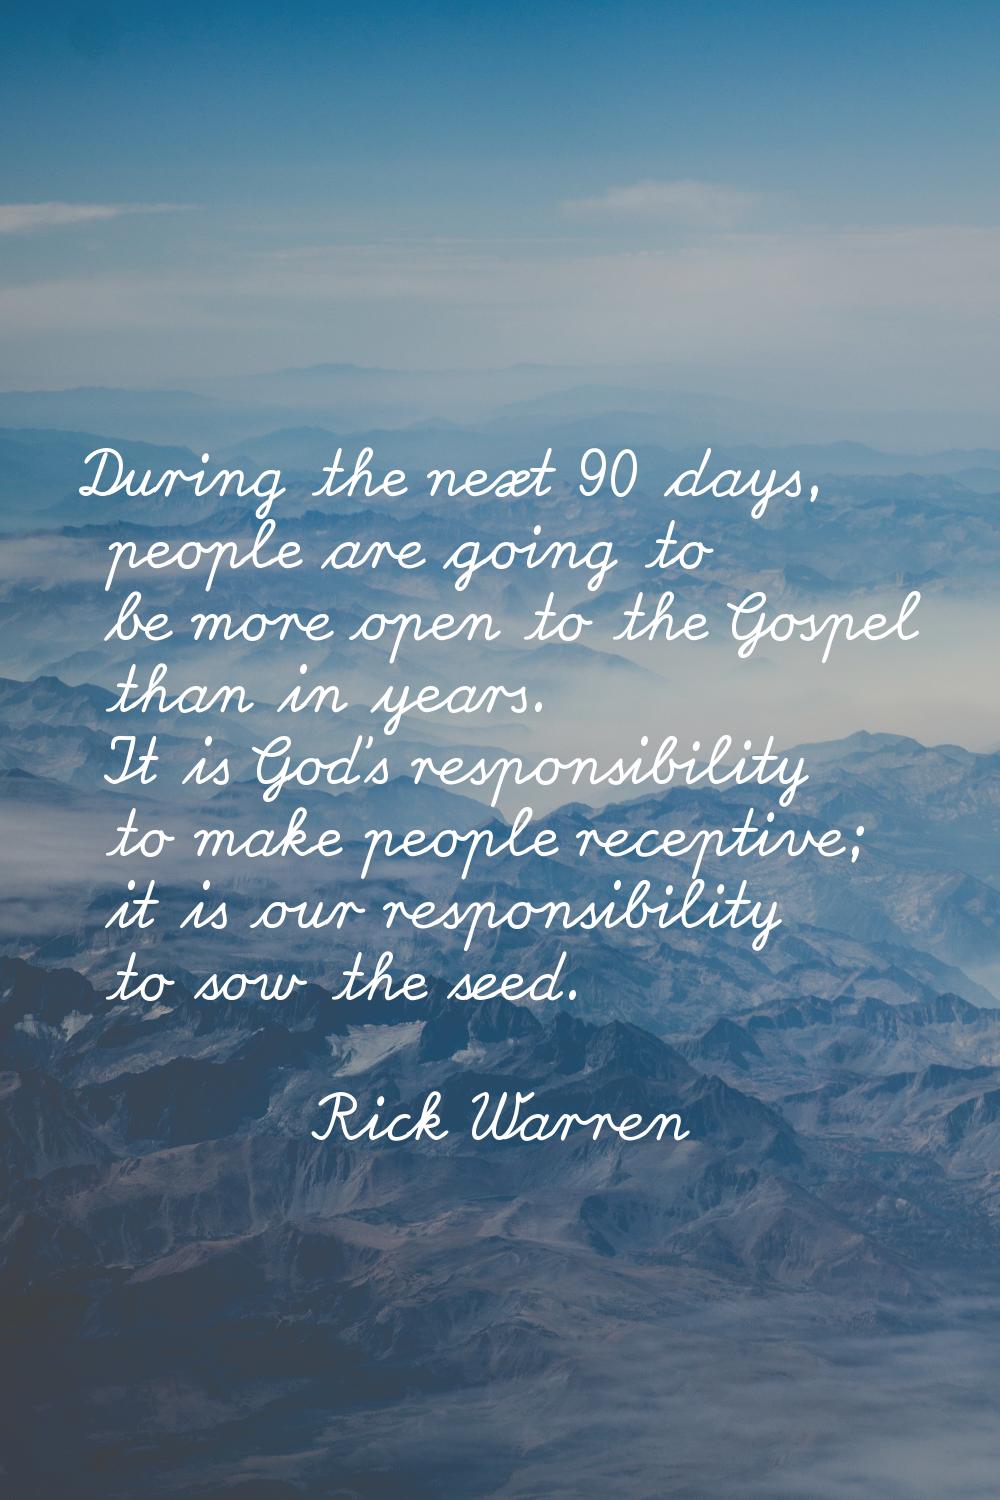 During the next 90 days, people are going to be more open to the Gospel than in years. It is God's 